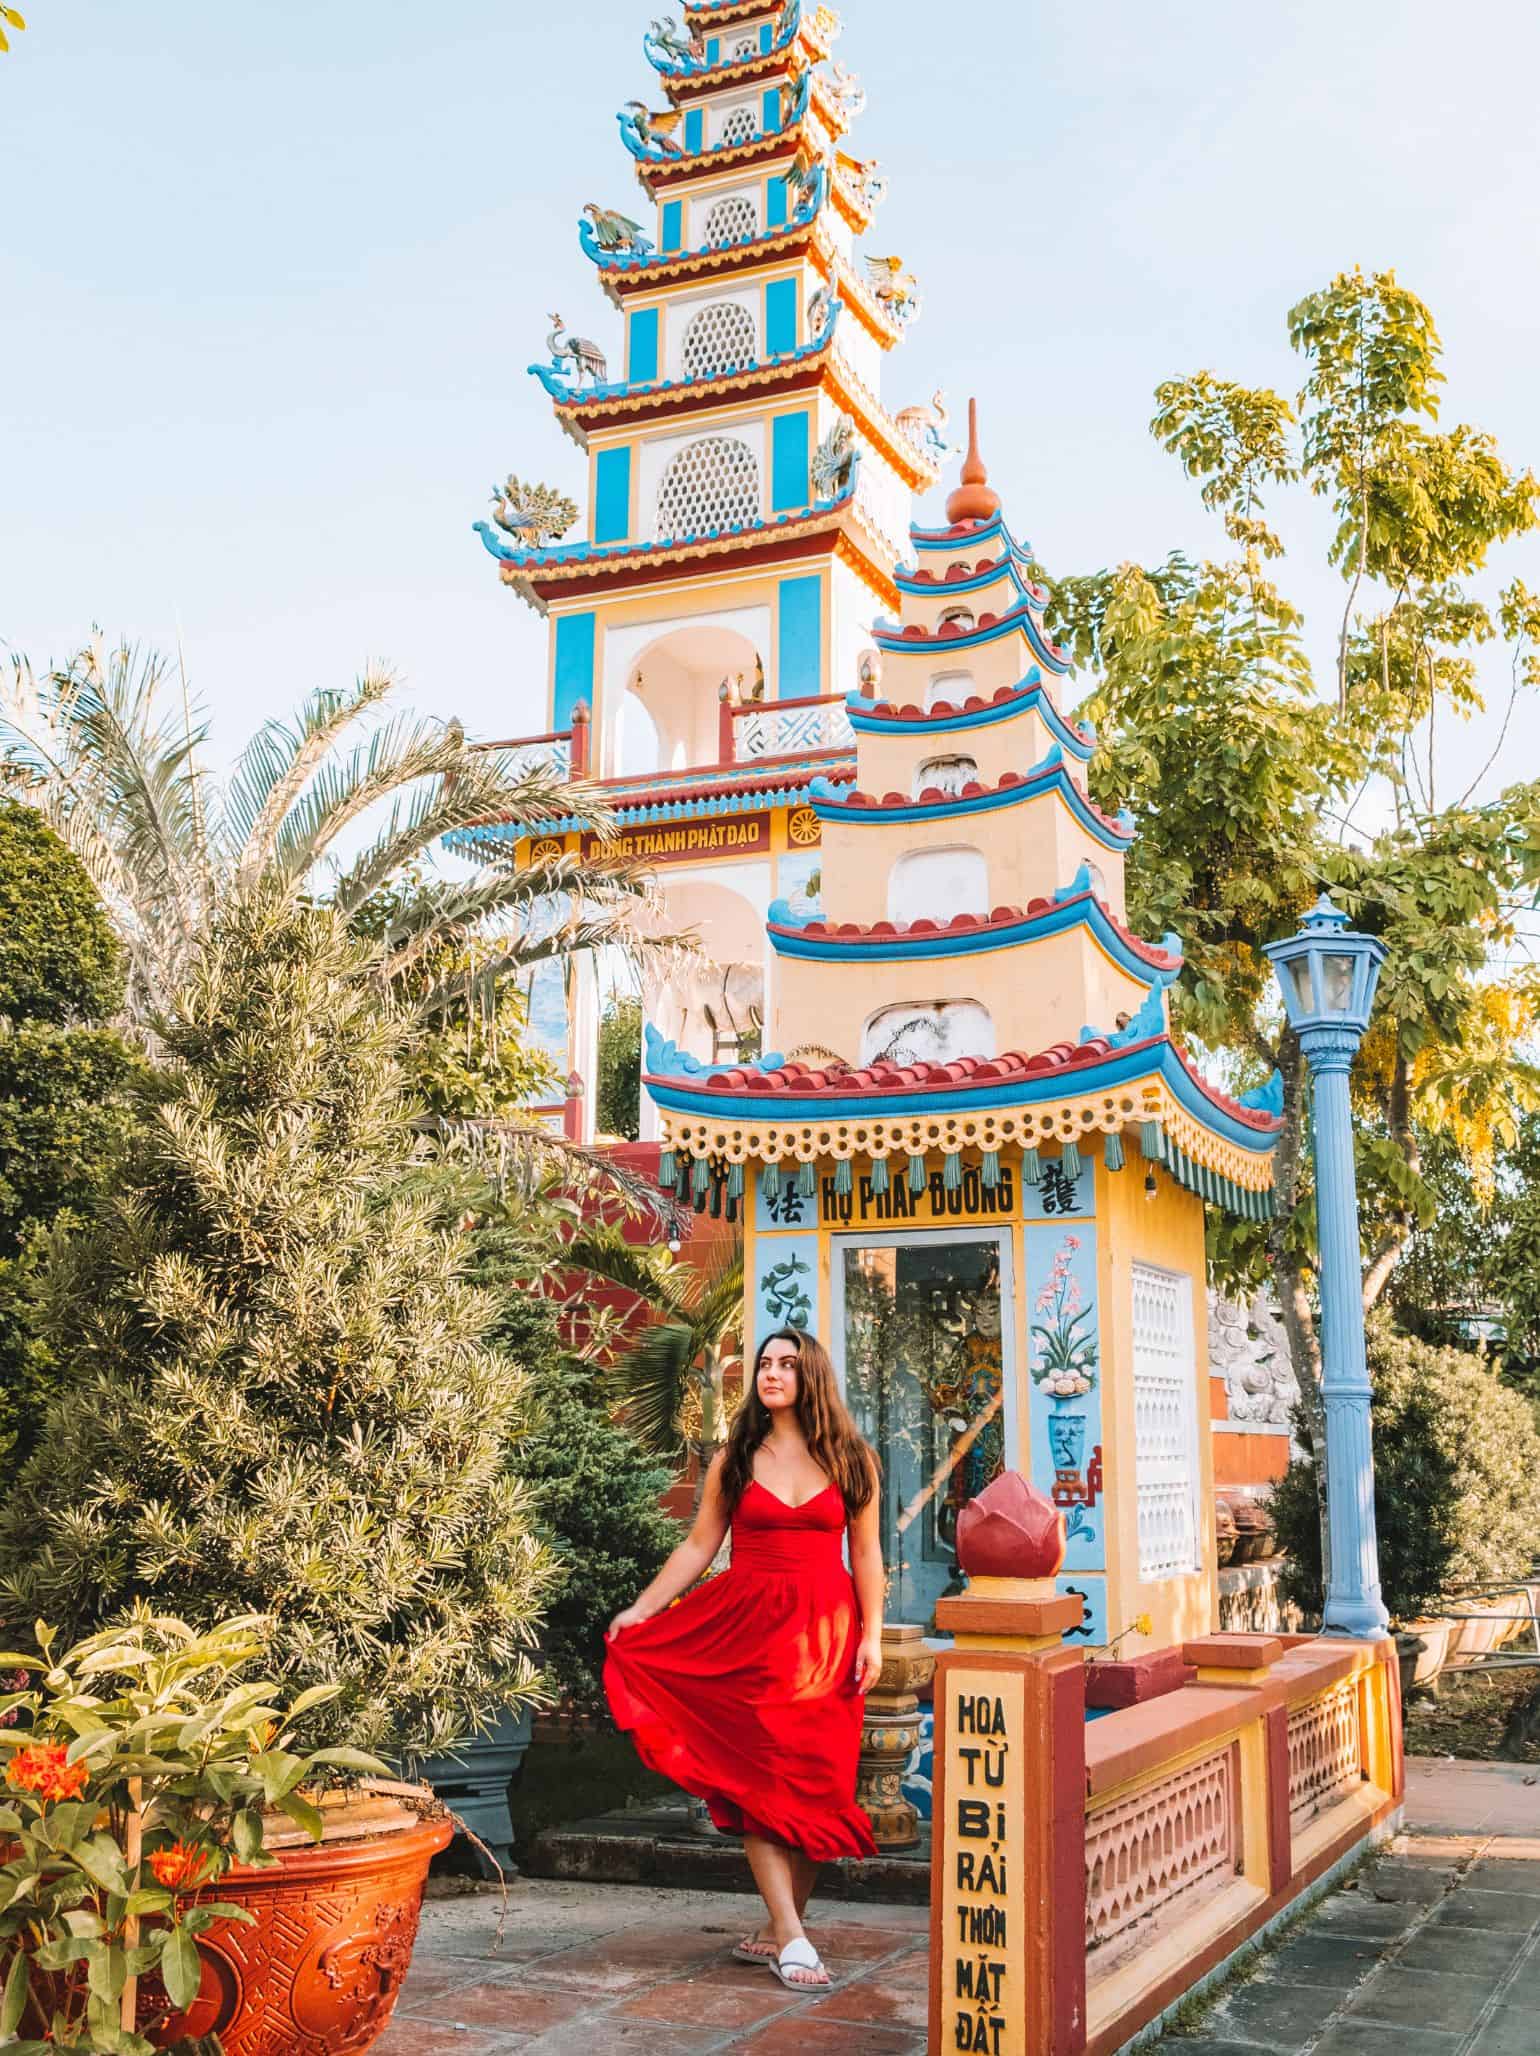 Me walking around the Chua Long Tuyen pagoda in Hoi An in my red dress that was made for me in the city.